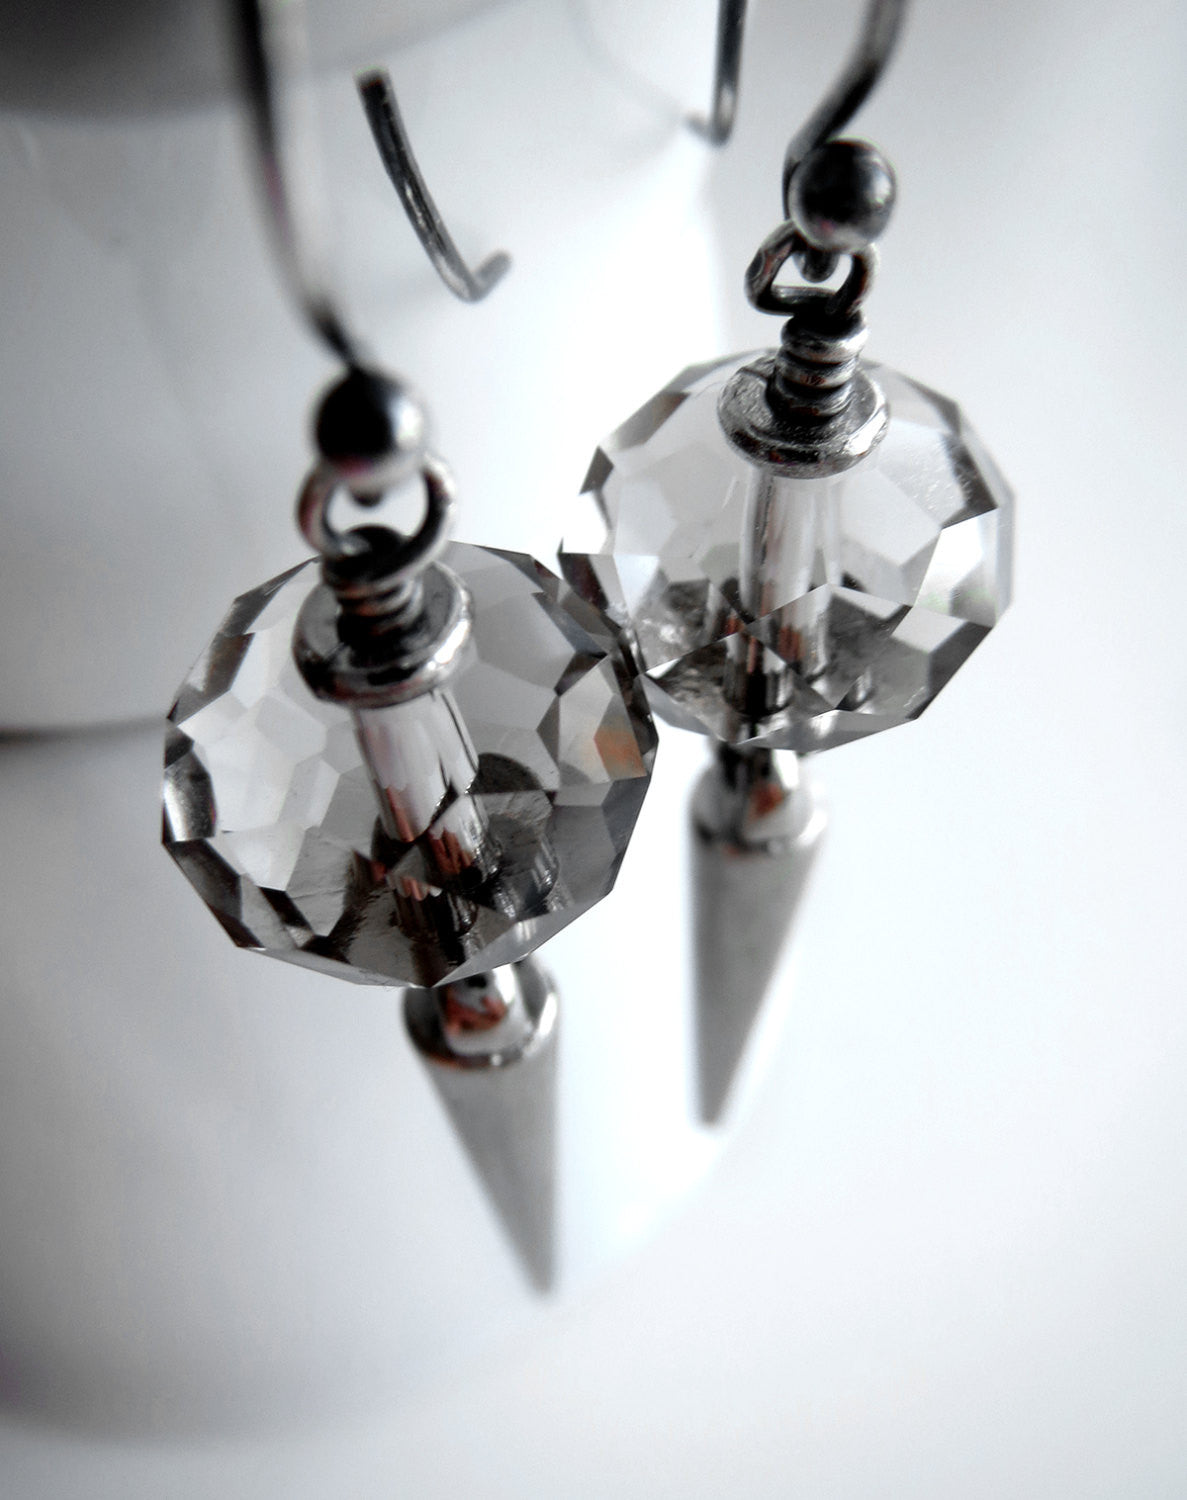 Silver Spike Earrings with Crystal Accents